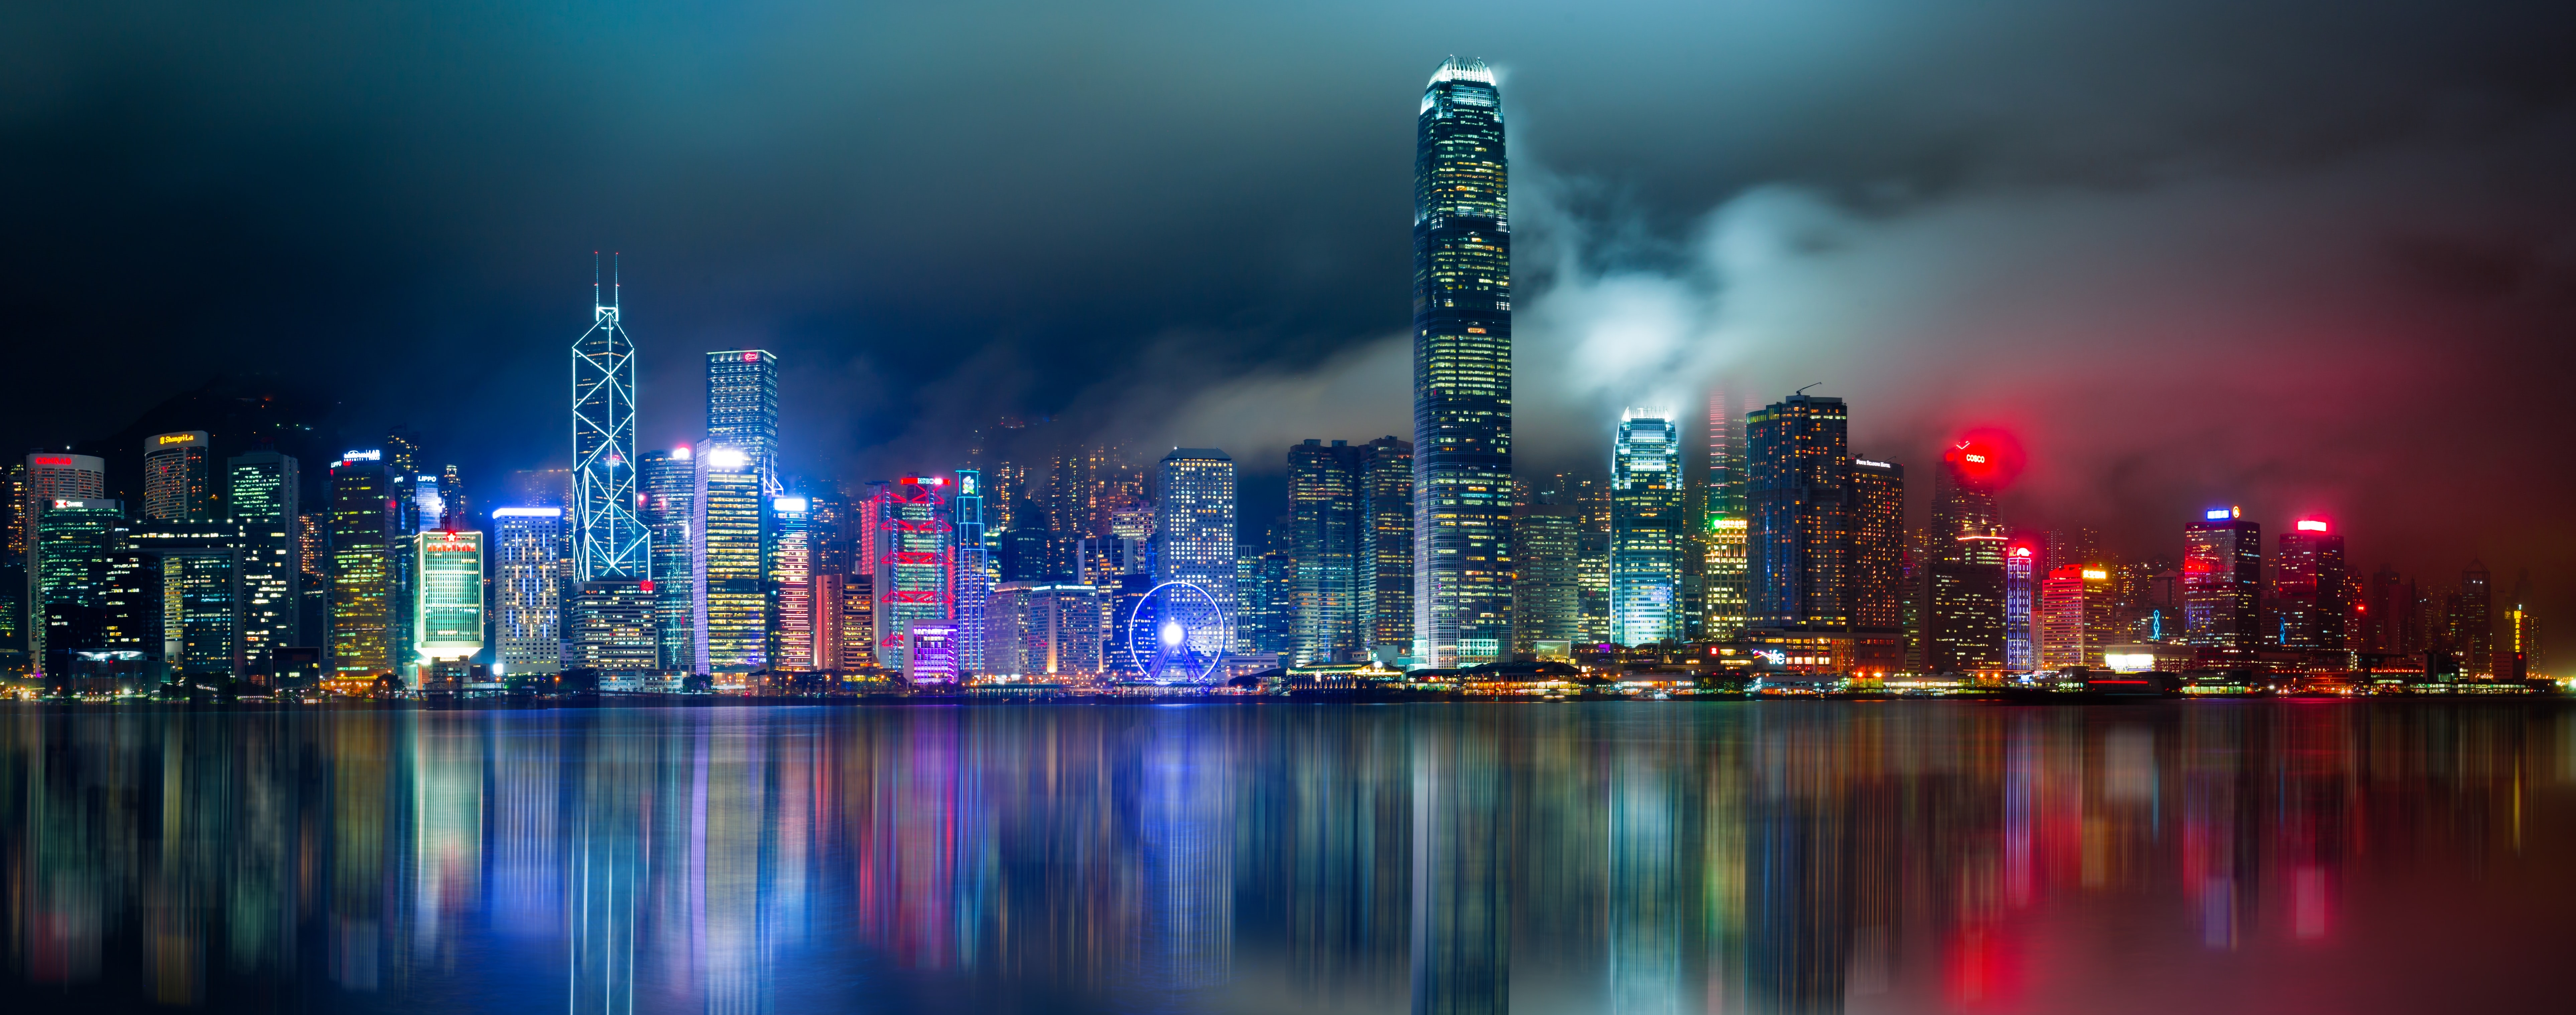 HD wallpaper, Skyscrapers, Skyline, Body Of Water, Reflection, 8K, Modern Architecture, Cityscape, 5K, Night Lights, Scenic, Hong Kong City